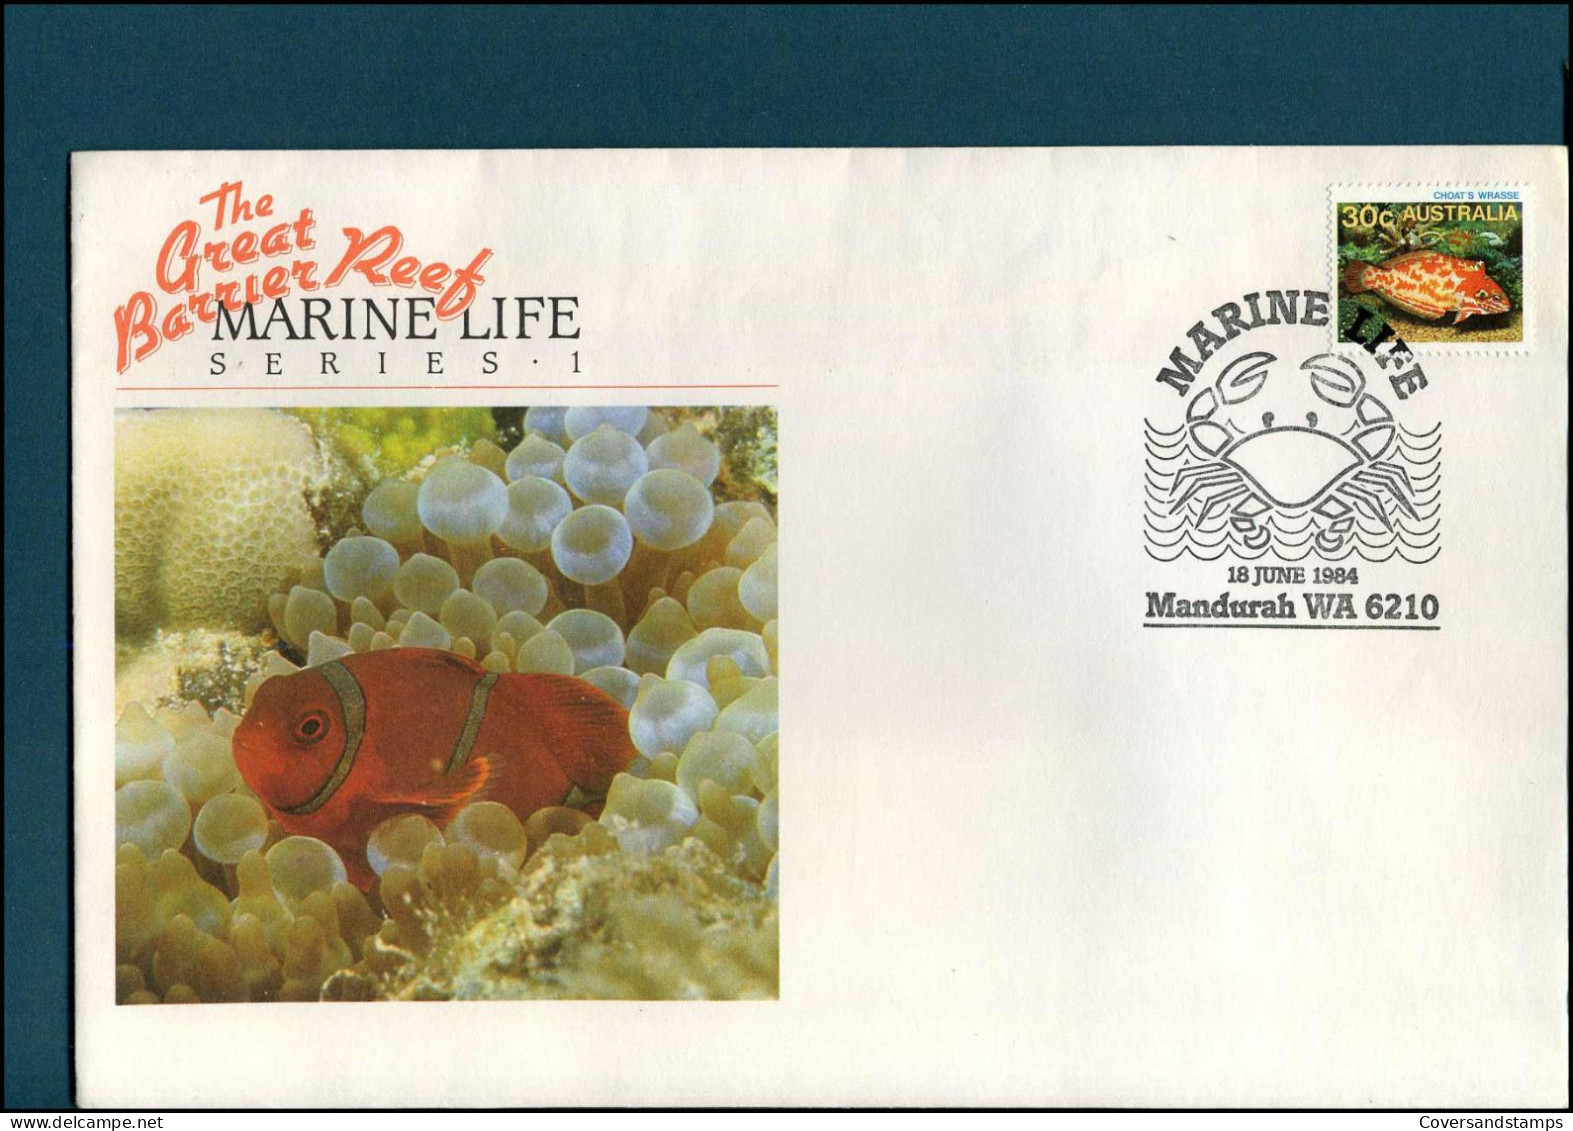 FDC - Marine Life Series 1 - The Great Barrier Reef - Premiers Jours (FDC)